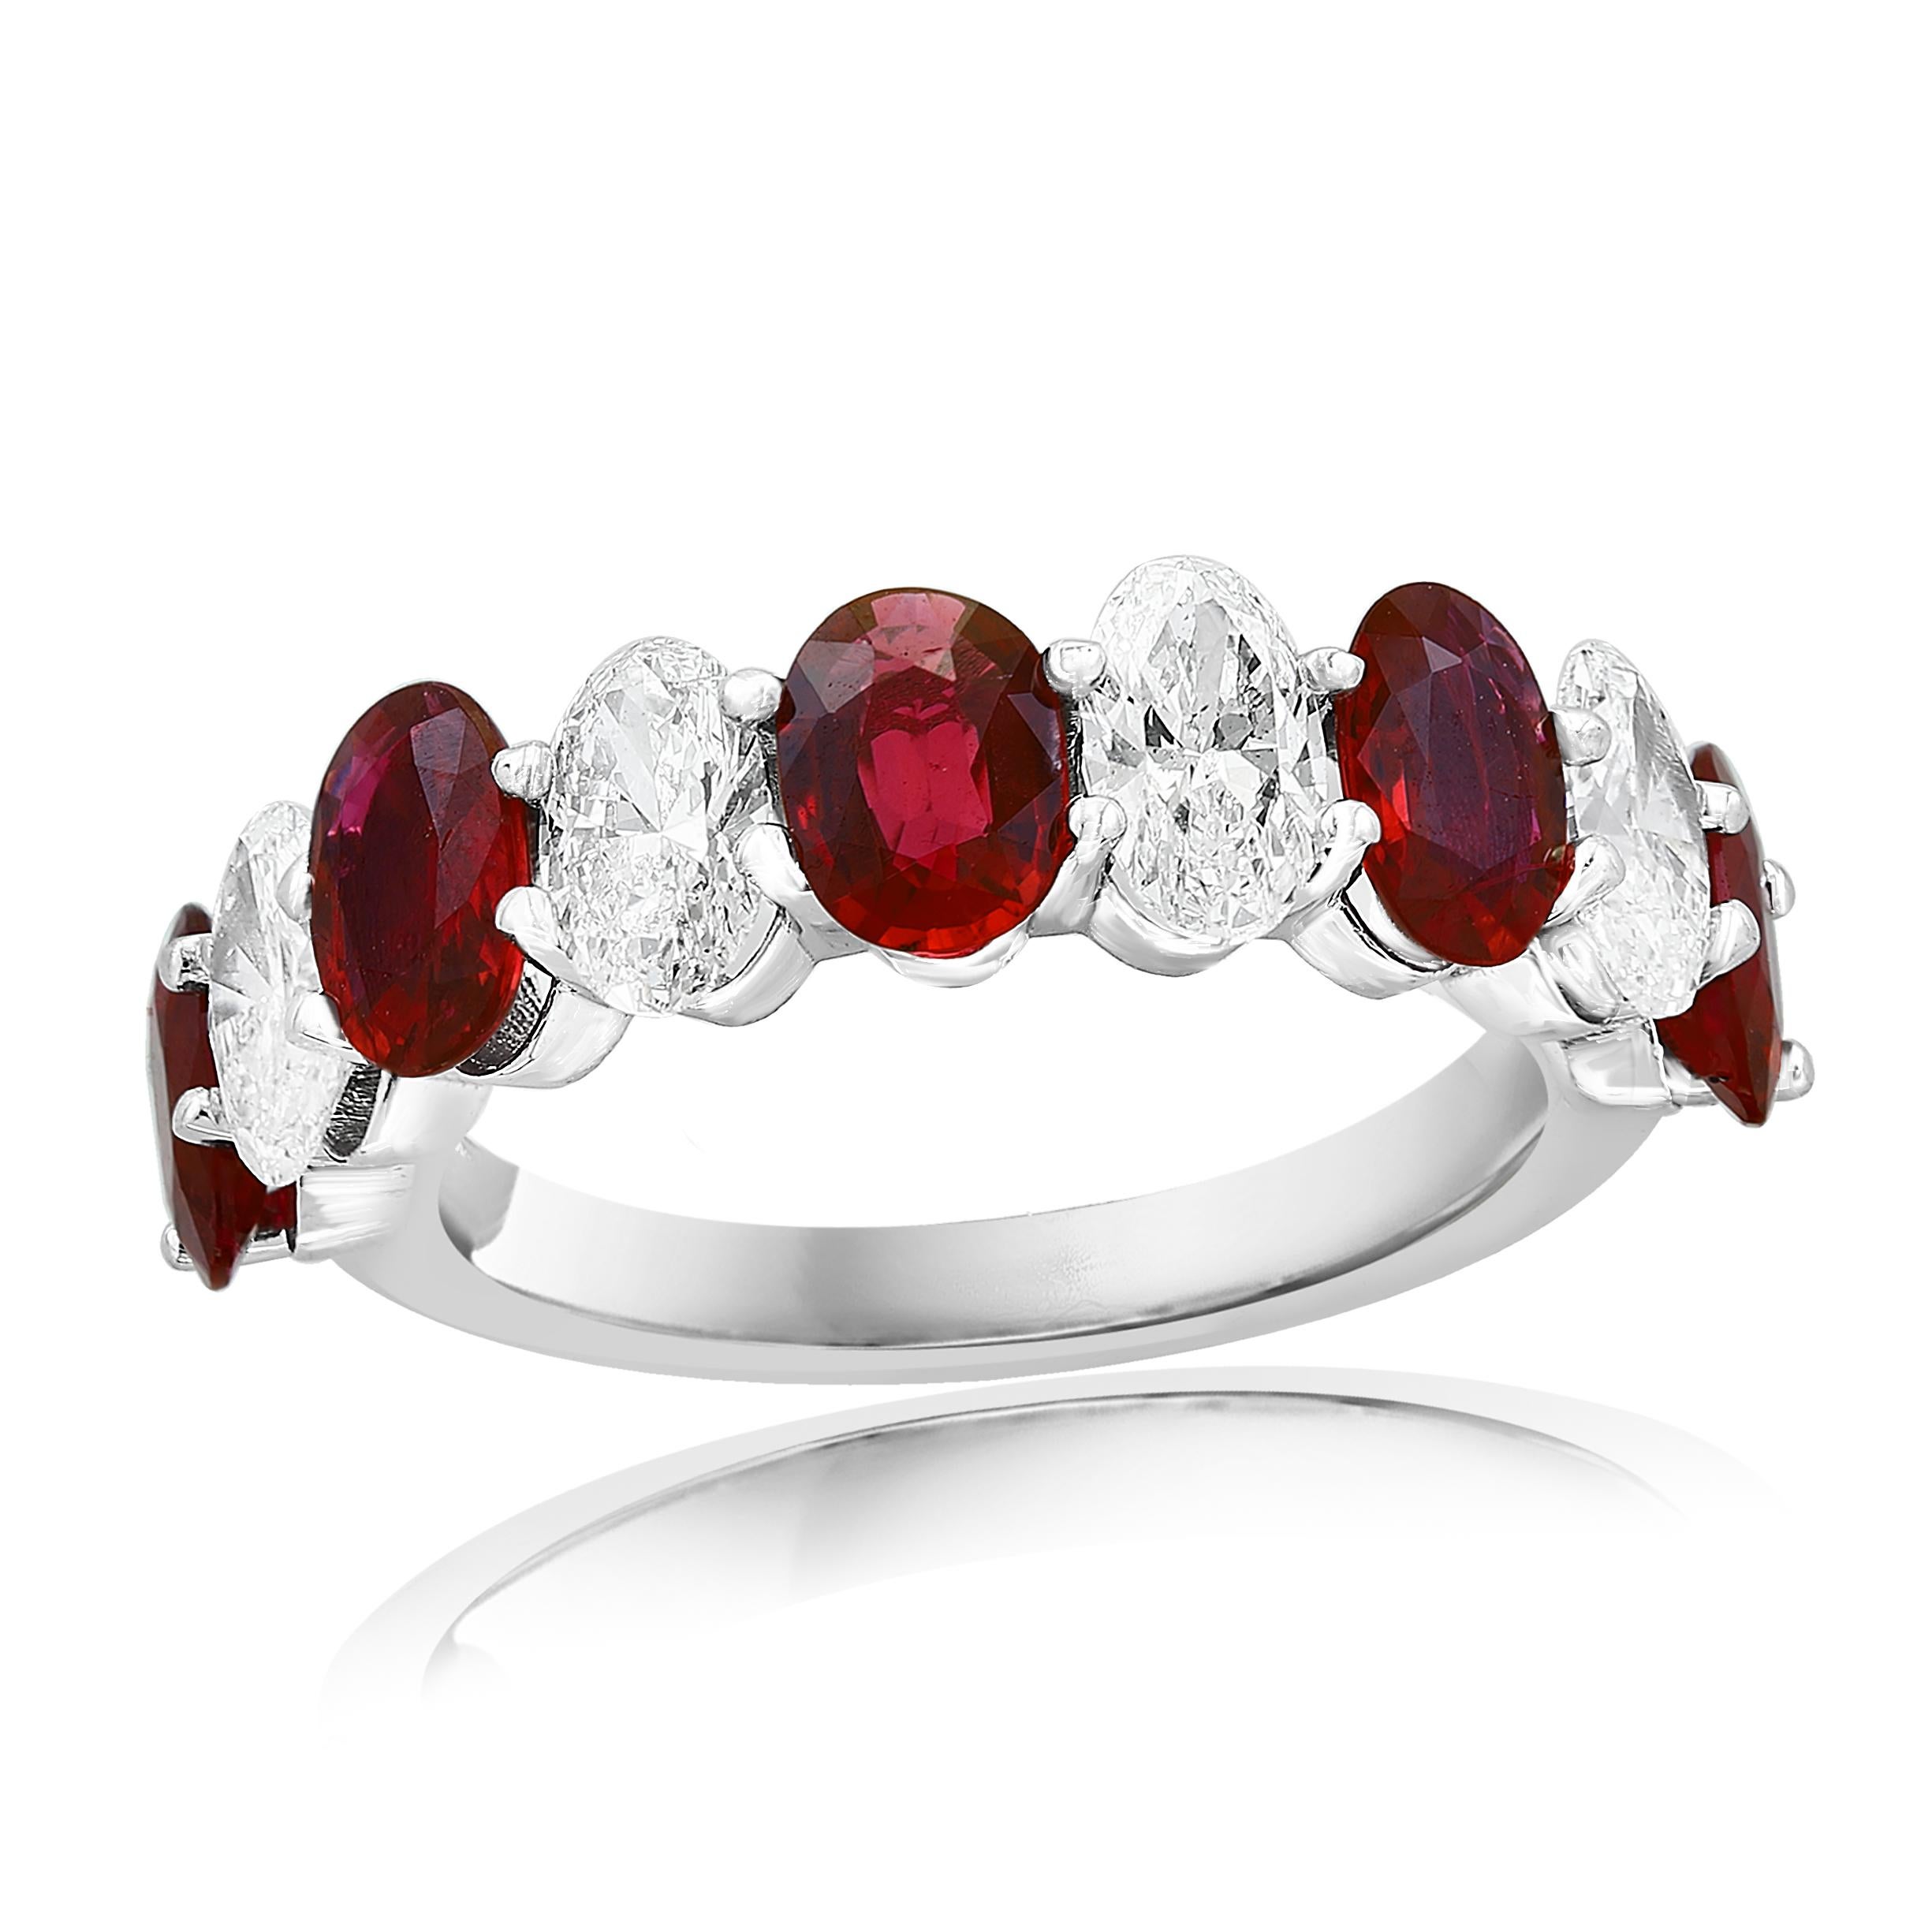 A fascinating gemstone wedding band 9 stone style showcasing 5  oval cut vivid red Rubies weighing 2.23 carats total, alternating to these red rubies are 4 oval cut brilliant colorless diamonds weighing 1.26 carats, Made in 14K White Gold, Size 6.5